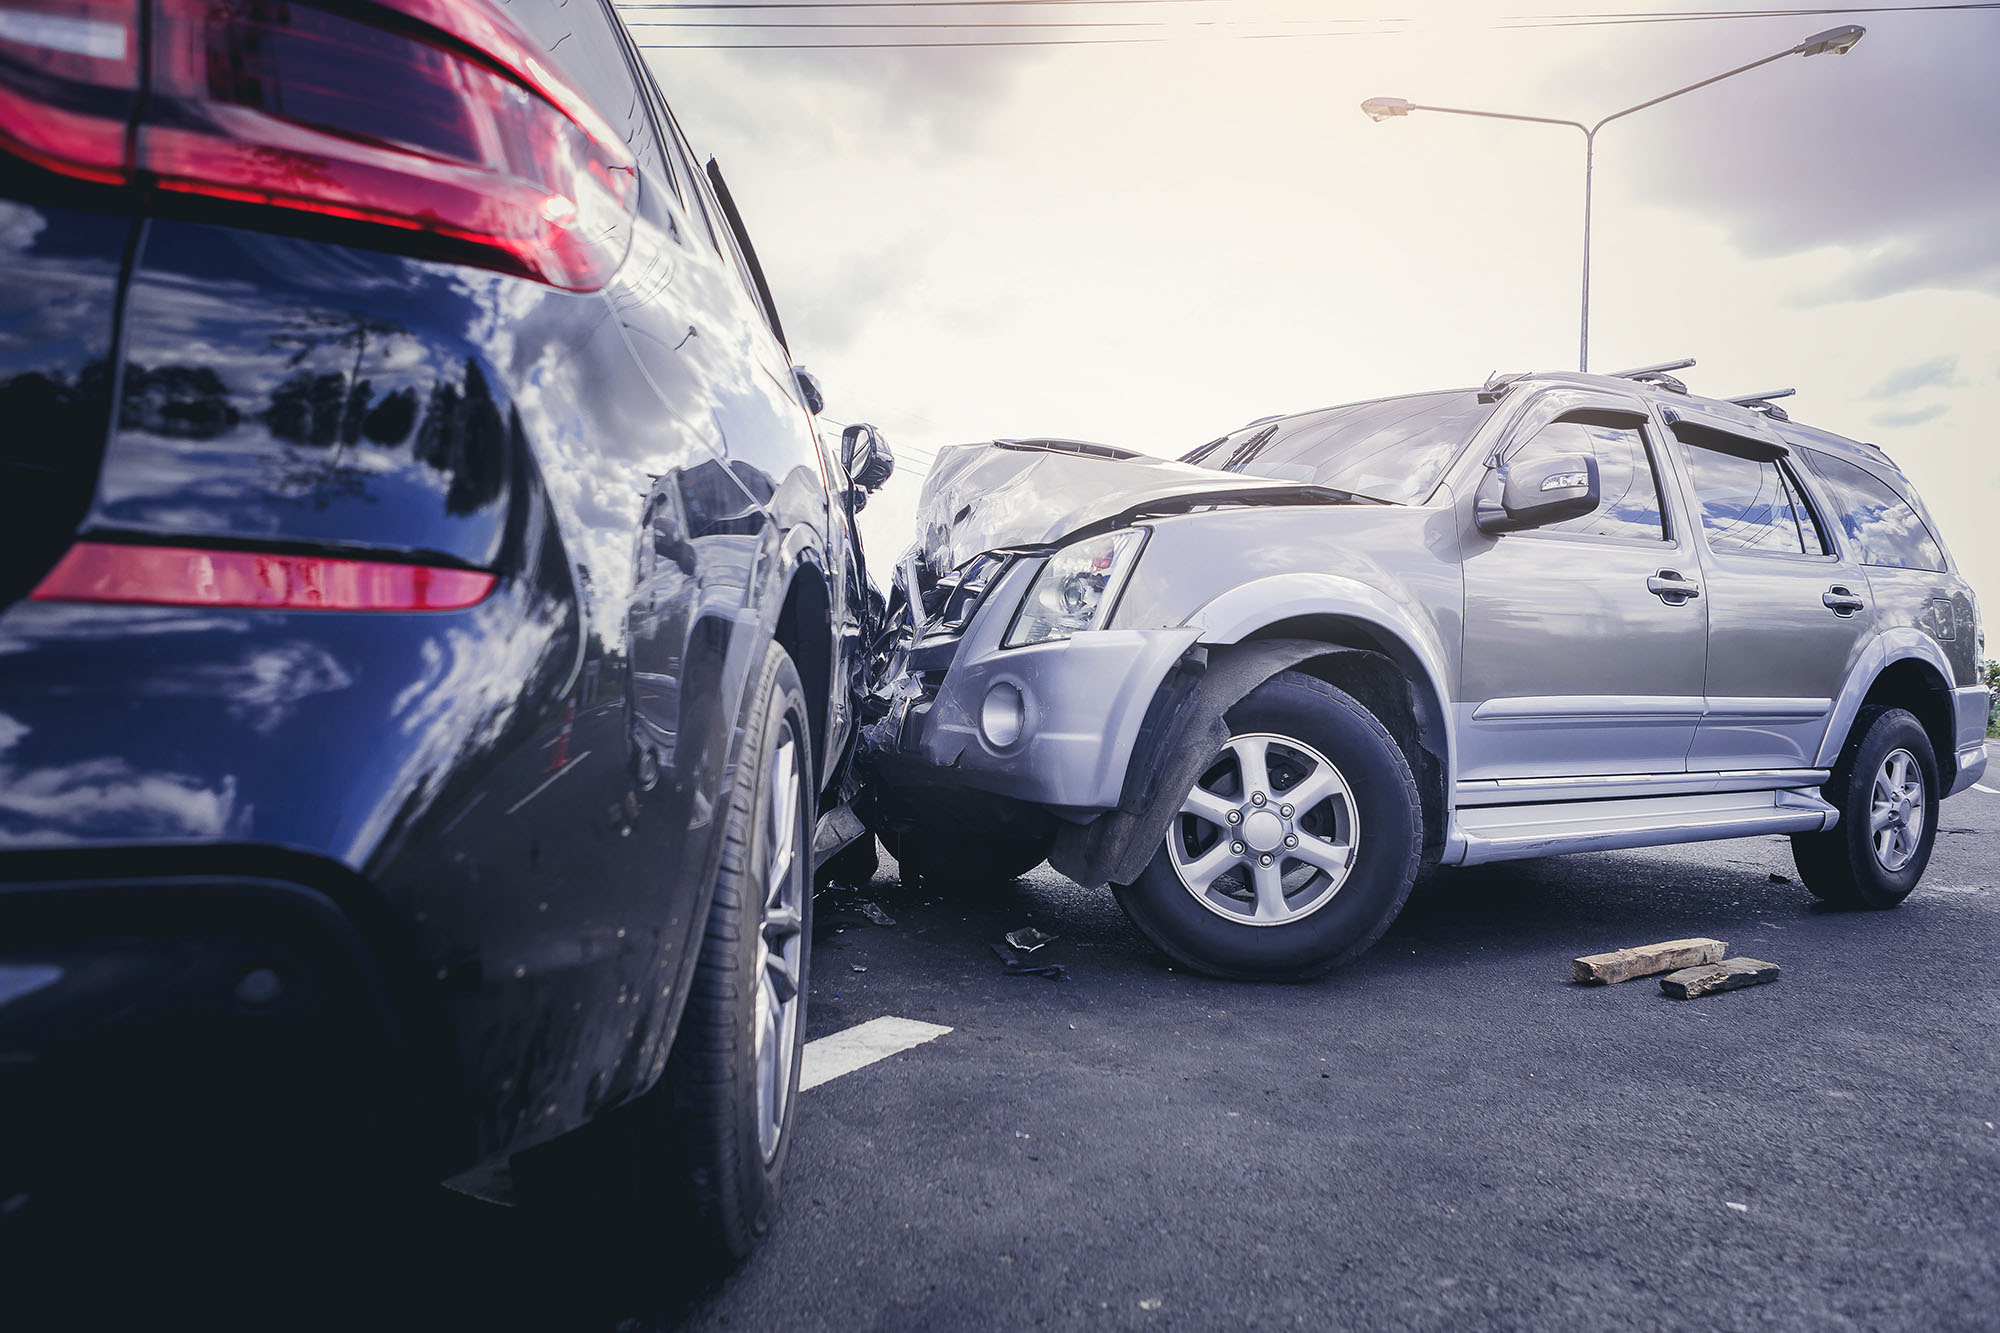 5 Things You Need To Know About Collision Repair